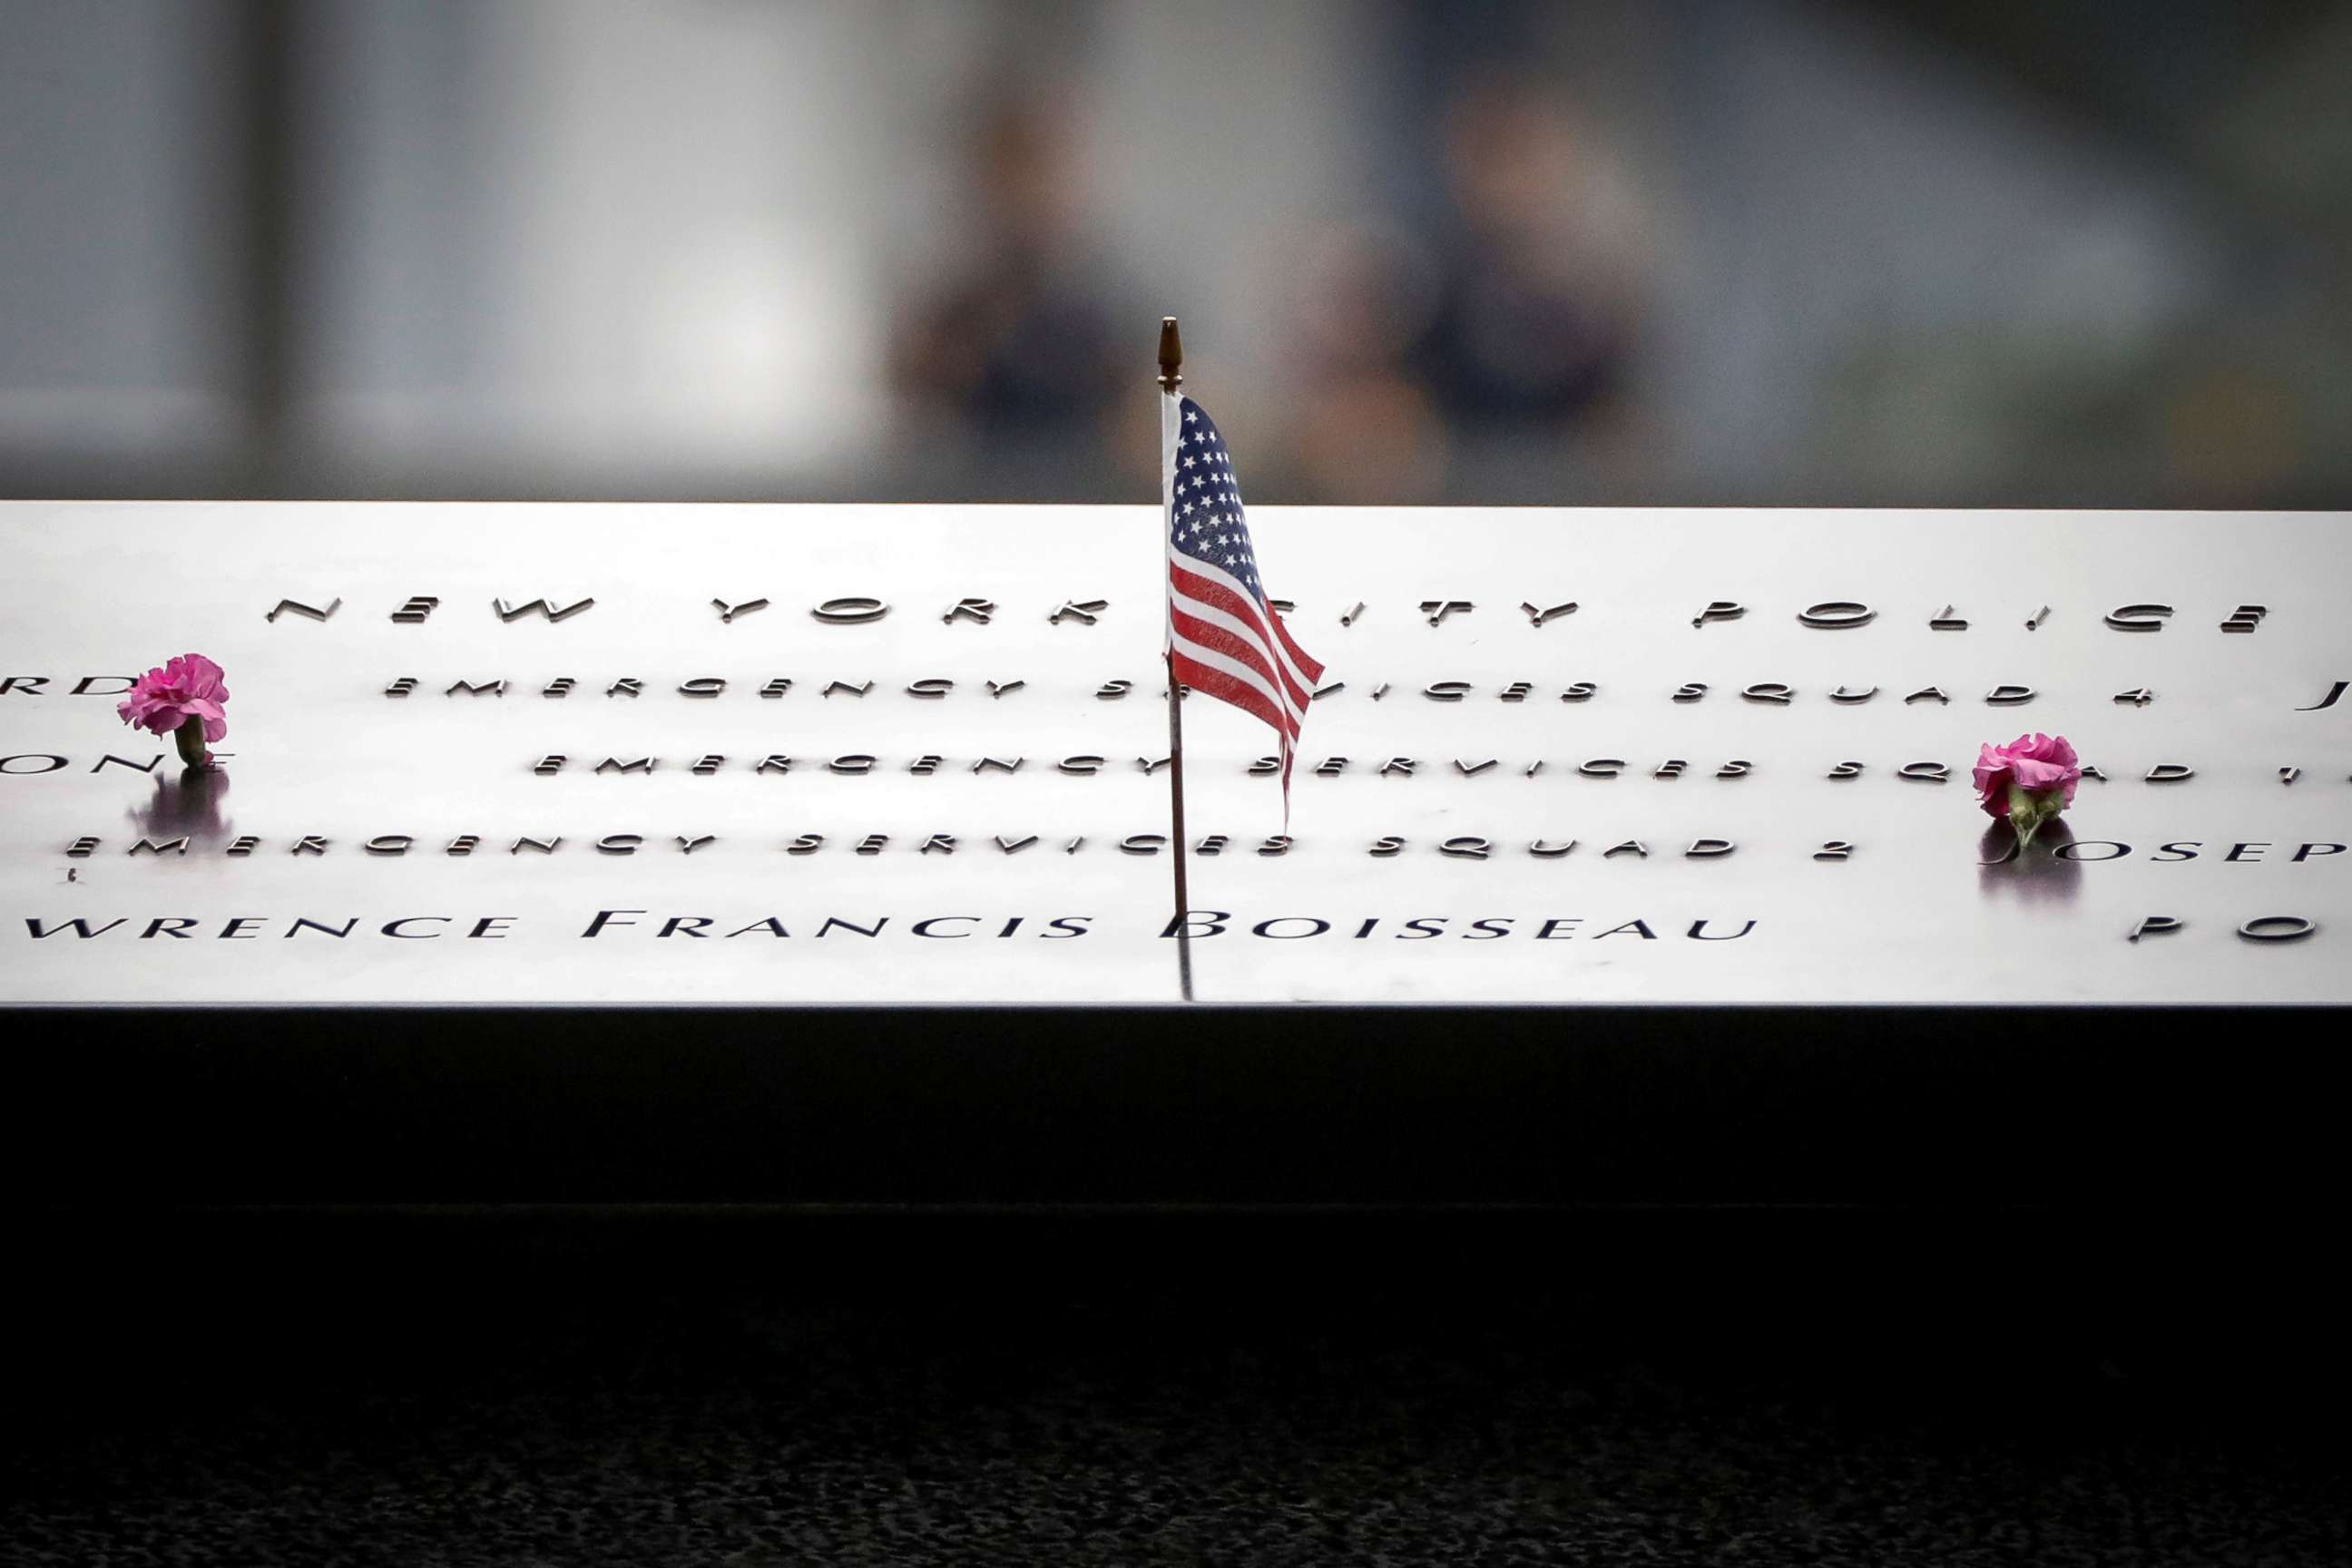 PHOTO: Flowers and a flag are left on names at the National 9/11 Memorial during ceremonies marking the 17th anniversary of the September 11, 2001 attacks on the World Trade Center, in New York, Sept. 11, 2018.